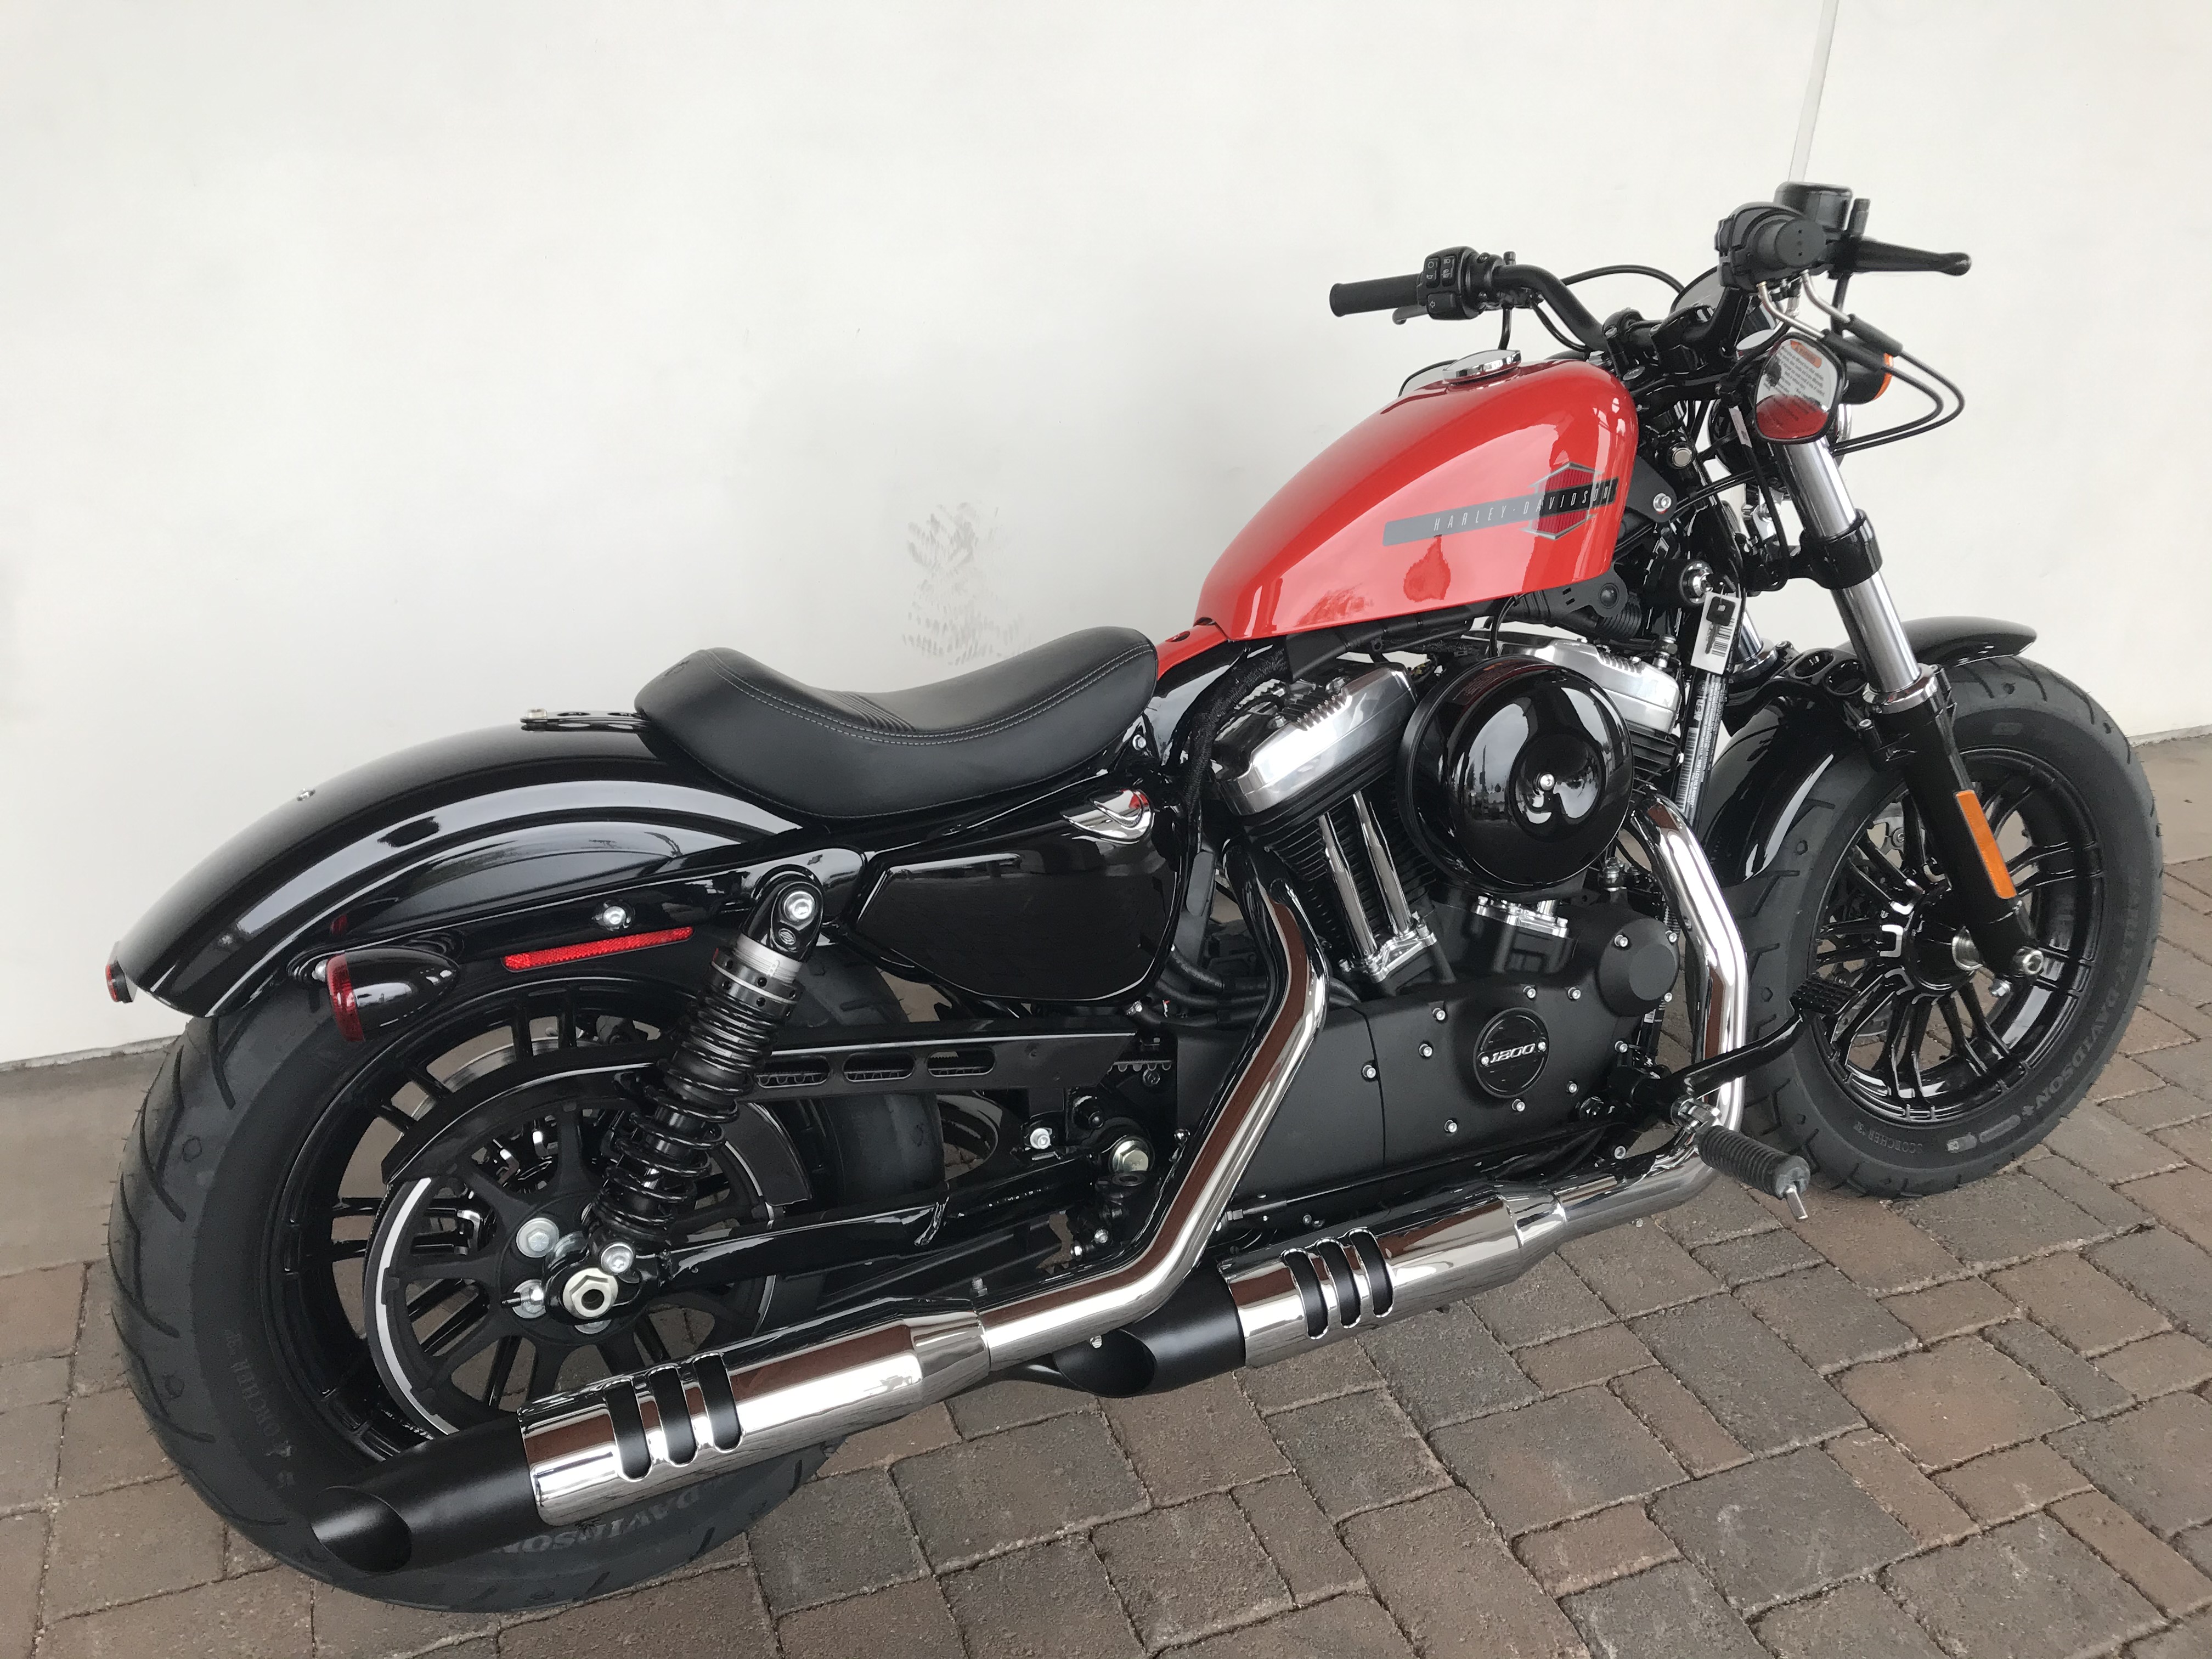 New 2020 Harley-Davidson Forty-Eight in Tucson #HD406207 ...